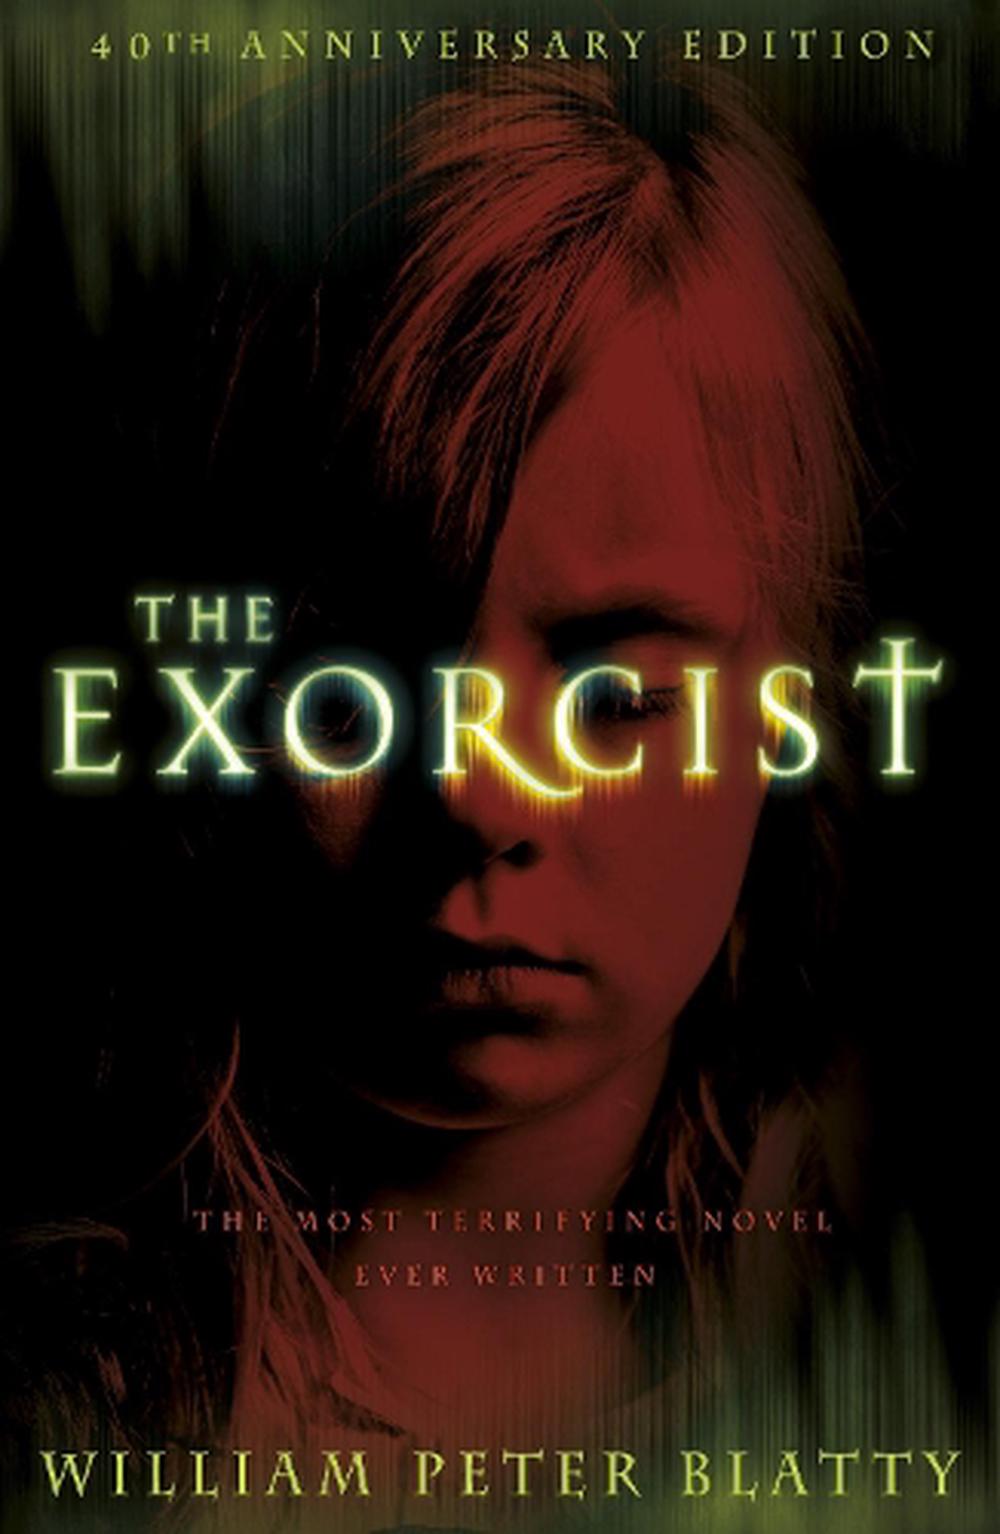 the exorcist by william peter blatty summary